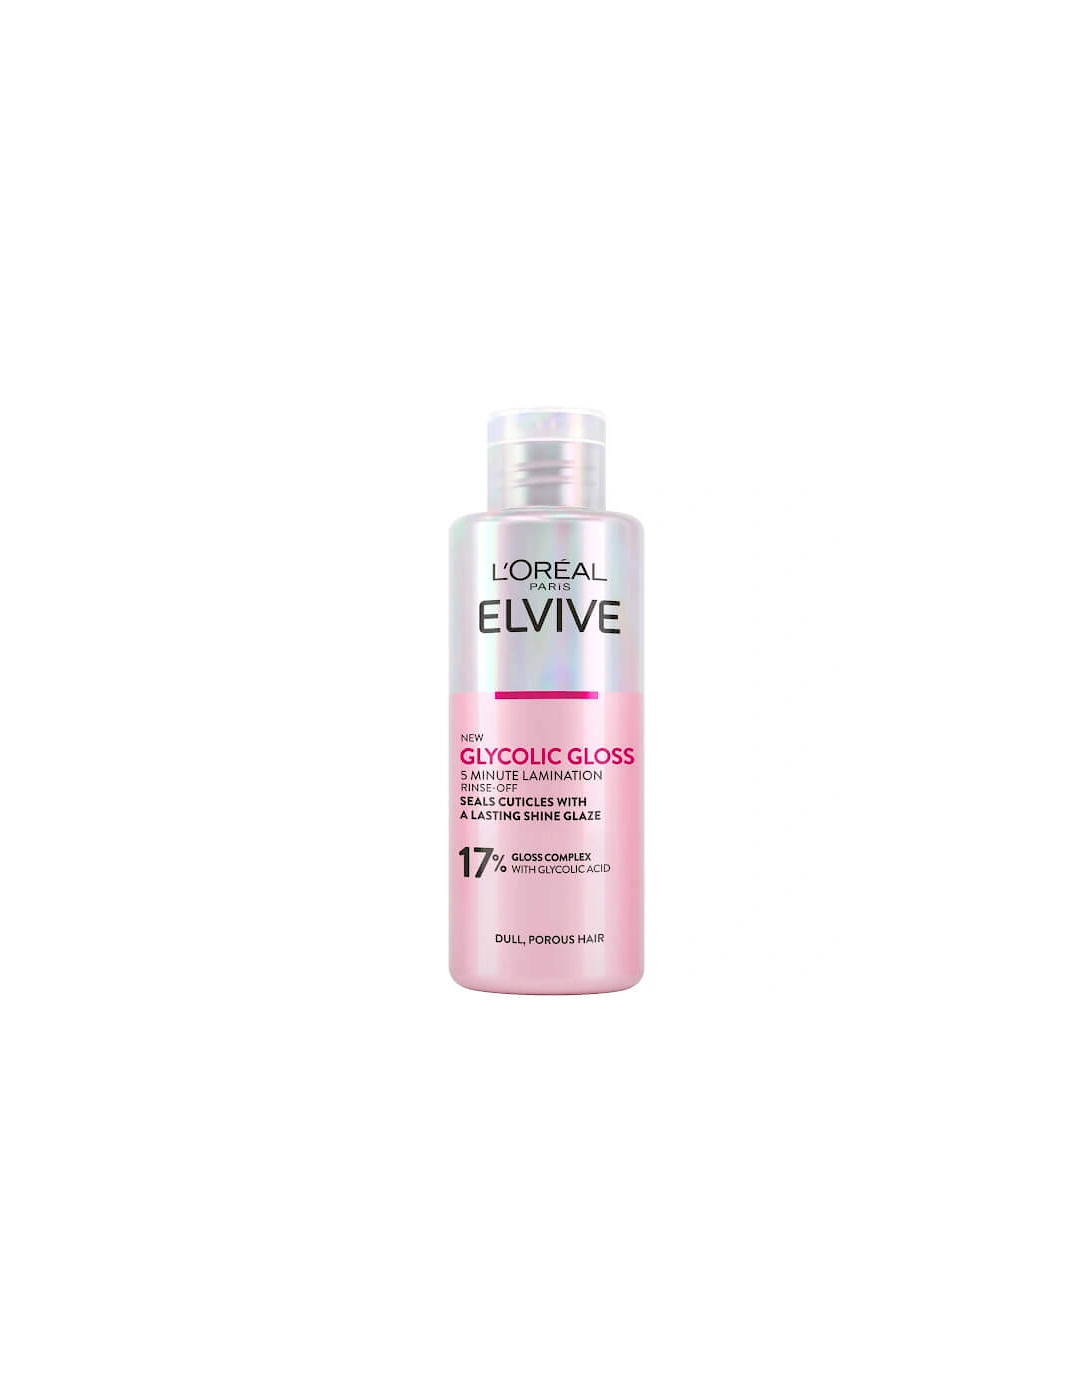 Paris Elvive Glycolic Gloss Rinse-Off 5 minute Lamination Treatment for Dull Hair 150ml, 2 of 1